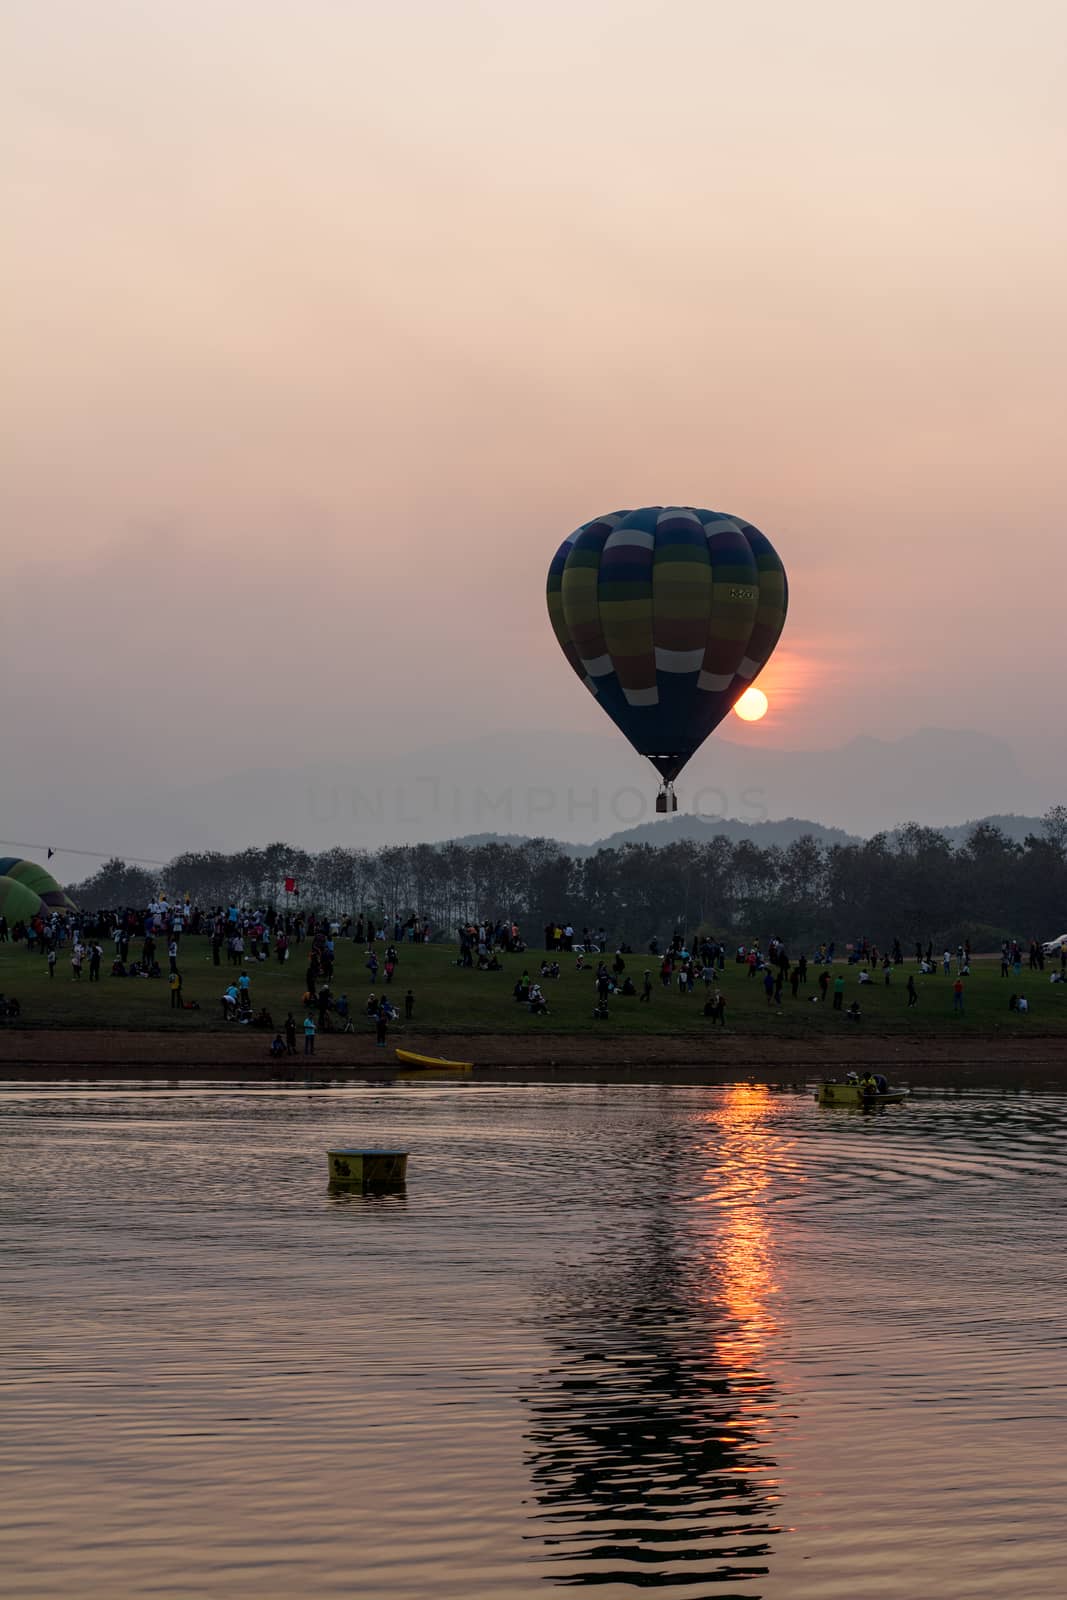 CHIANGRAI, THAILAND - FEBRUARY 14, 2016 : Hot air Balloons ready to rise into the sky in the evening at SINGHA PARK CHIANGRAI BALLOON FIESTA 2016, Chiangrai province, Thailand